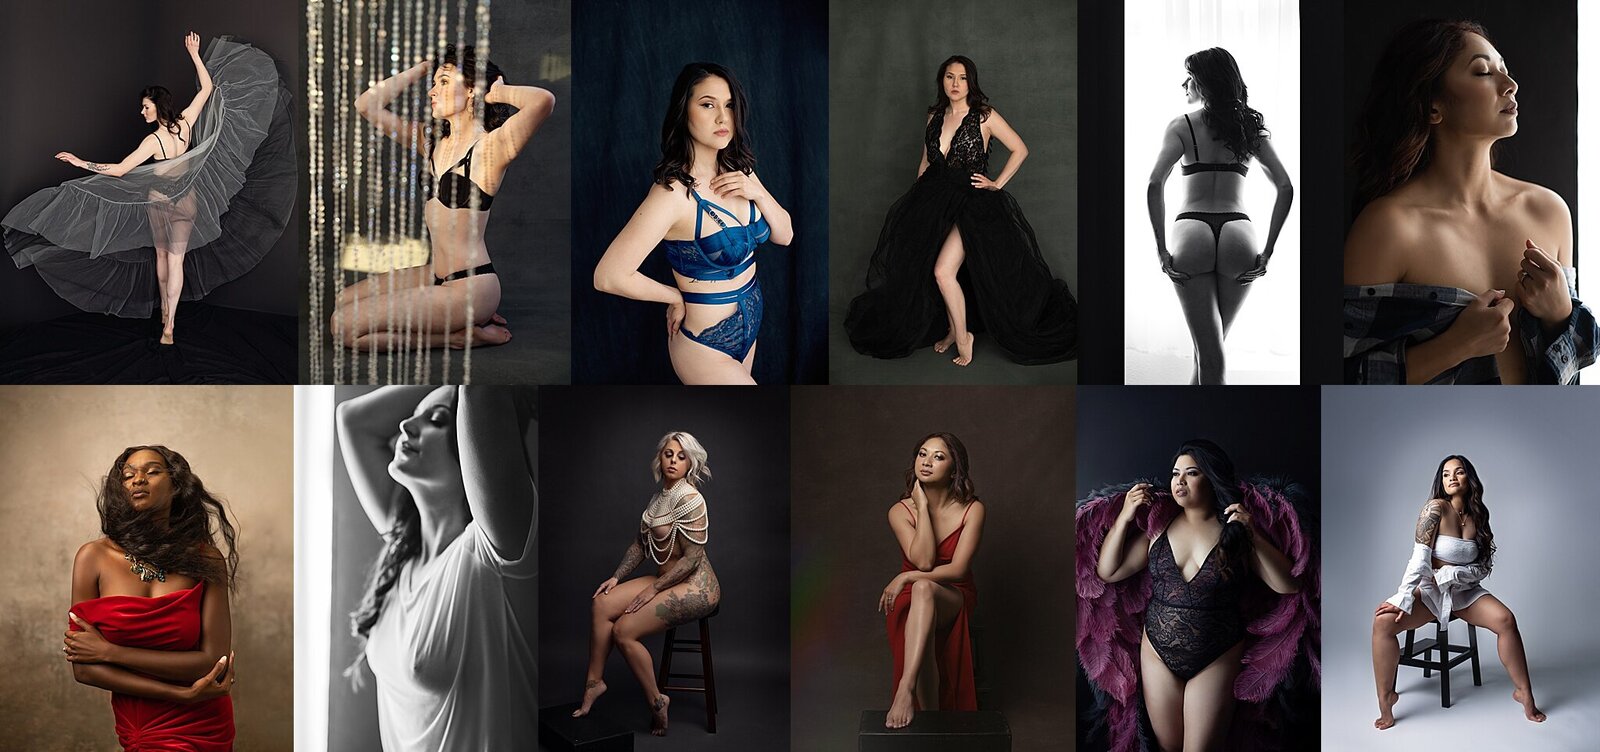 specializing in beauty boudoir, women empowerement and body positivity